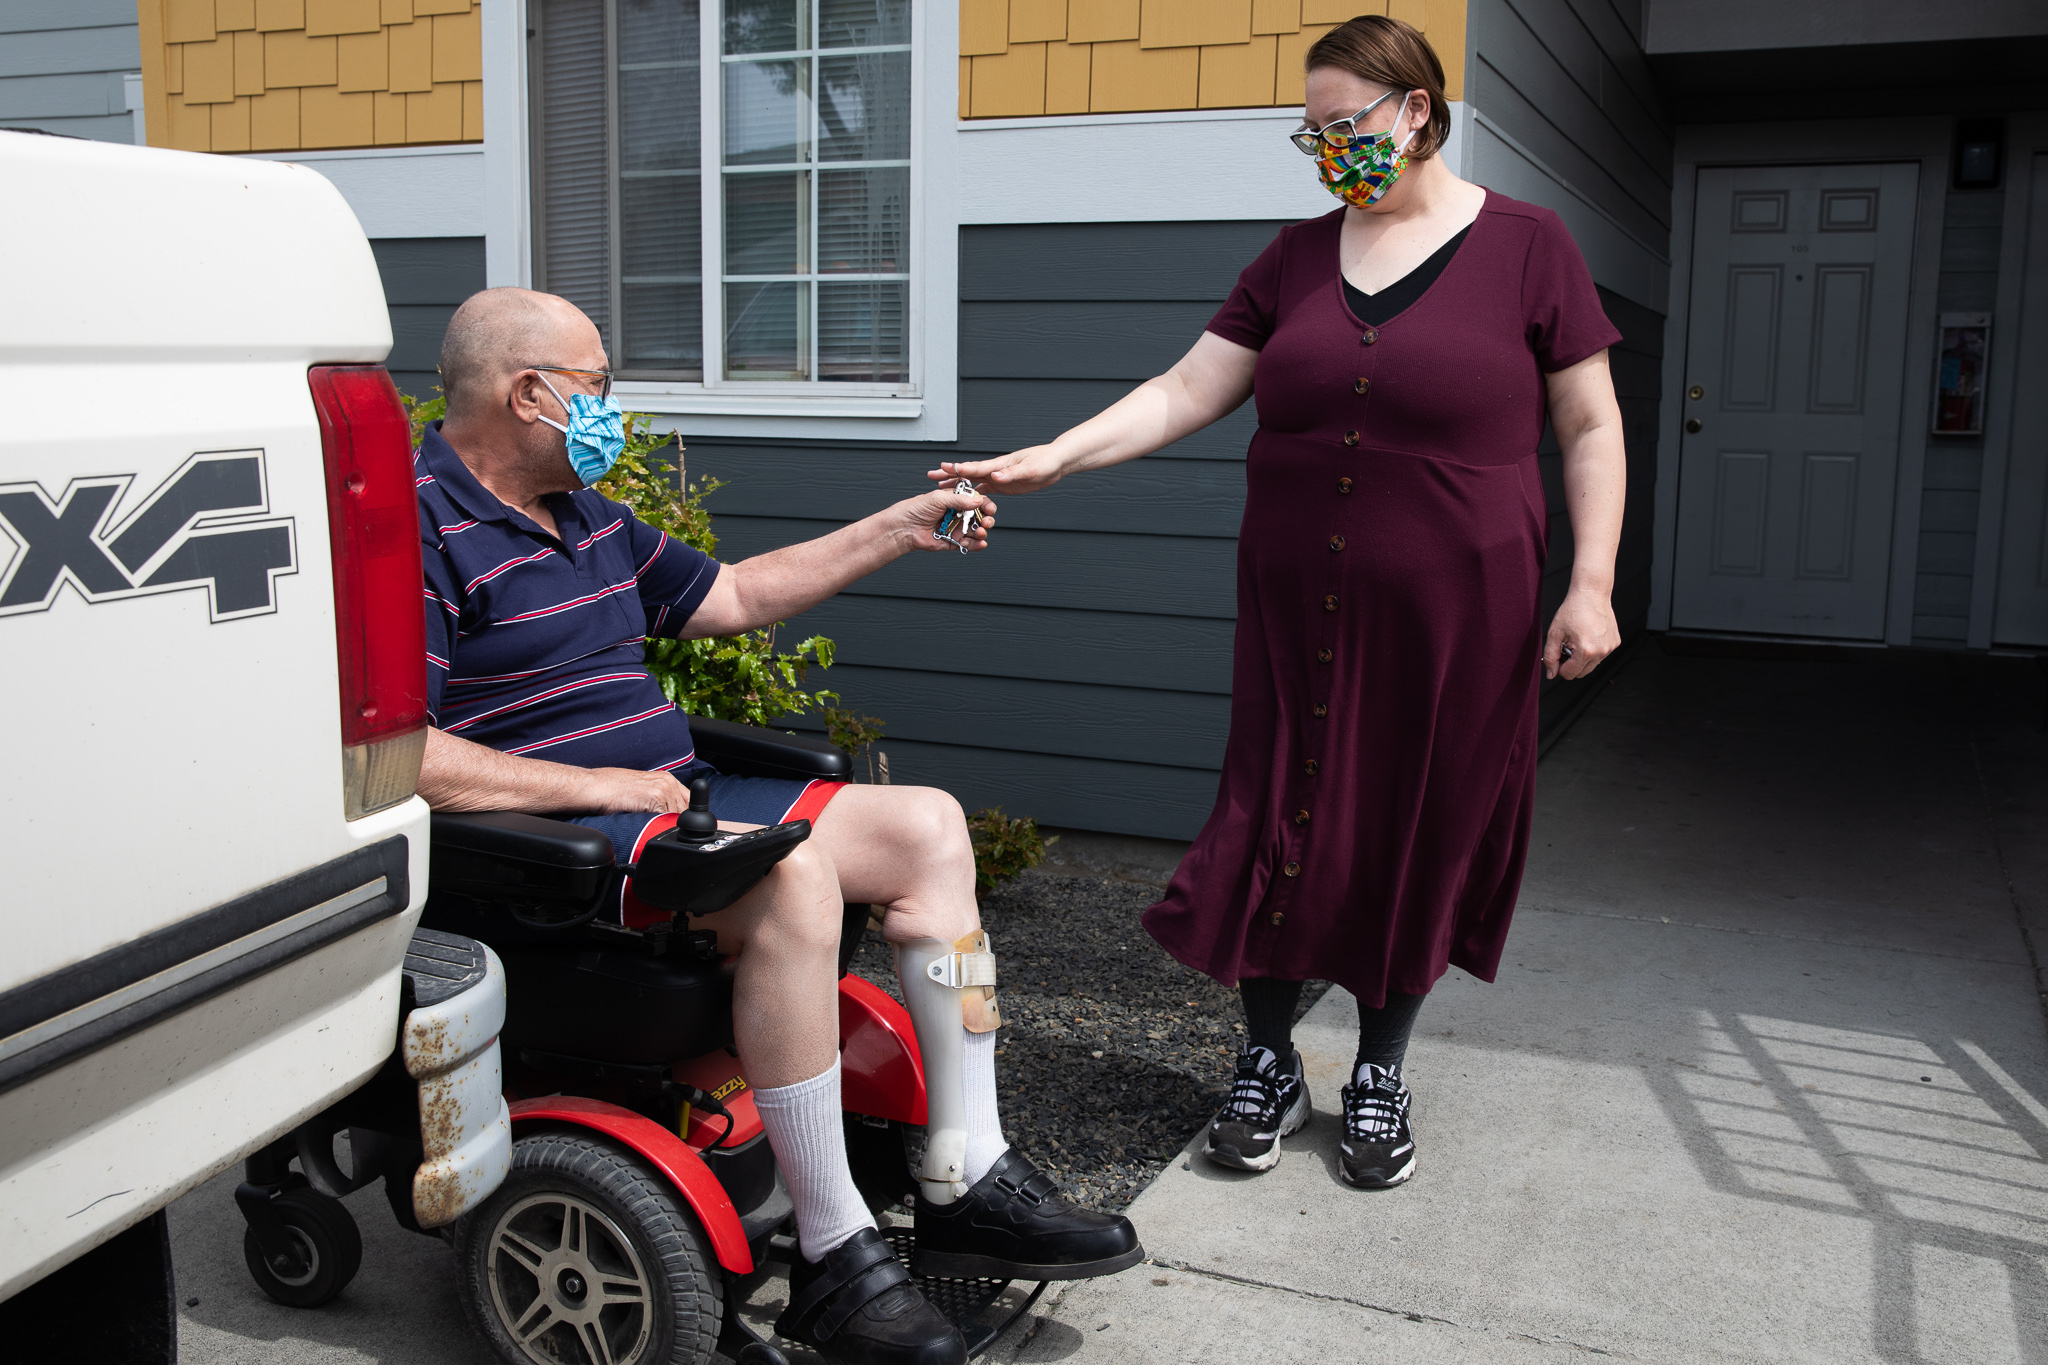 Desirae hands keys to Scott, who sits in a wheelchair